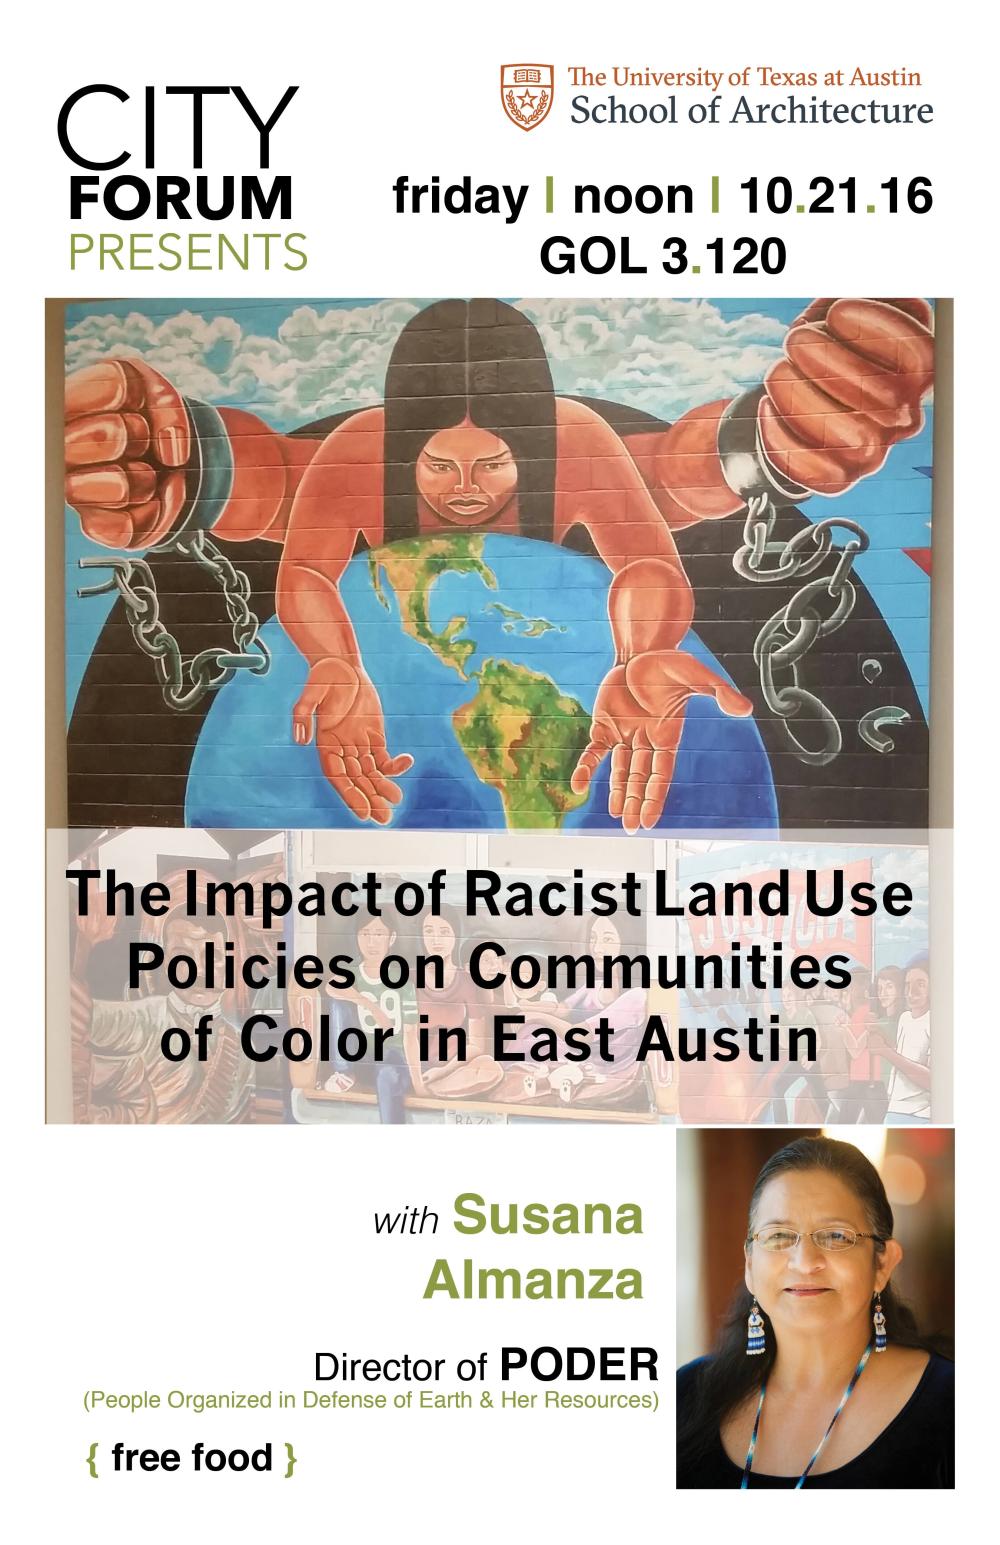 The Impact of Racist Land Use Policies on Communities of Color in East Austin